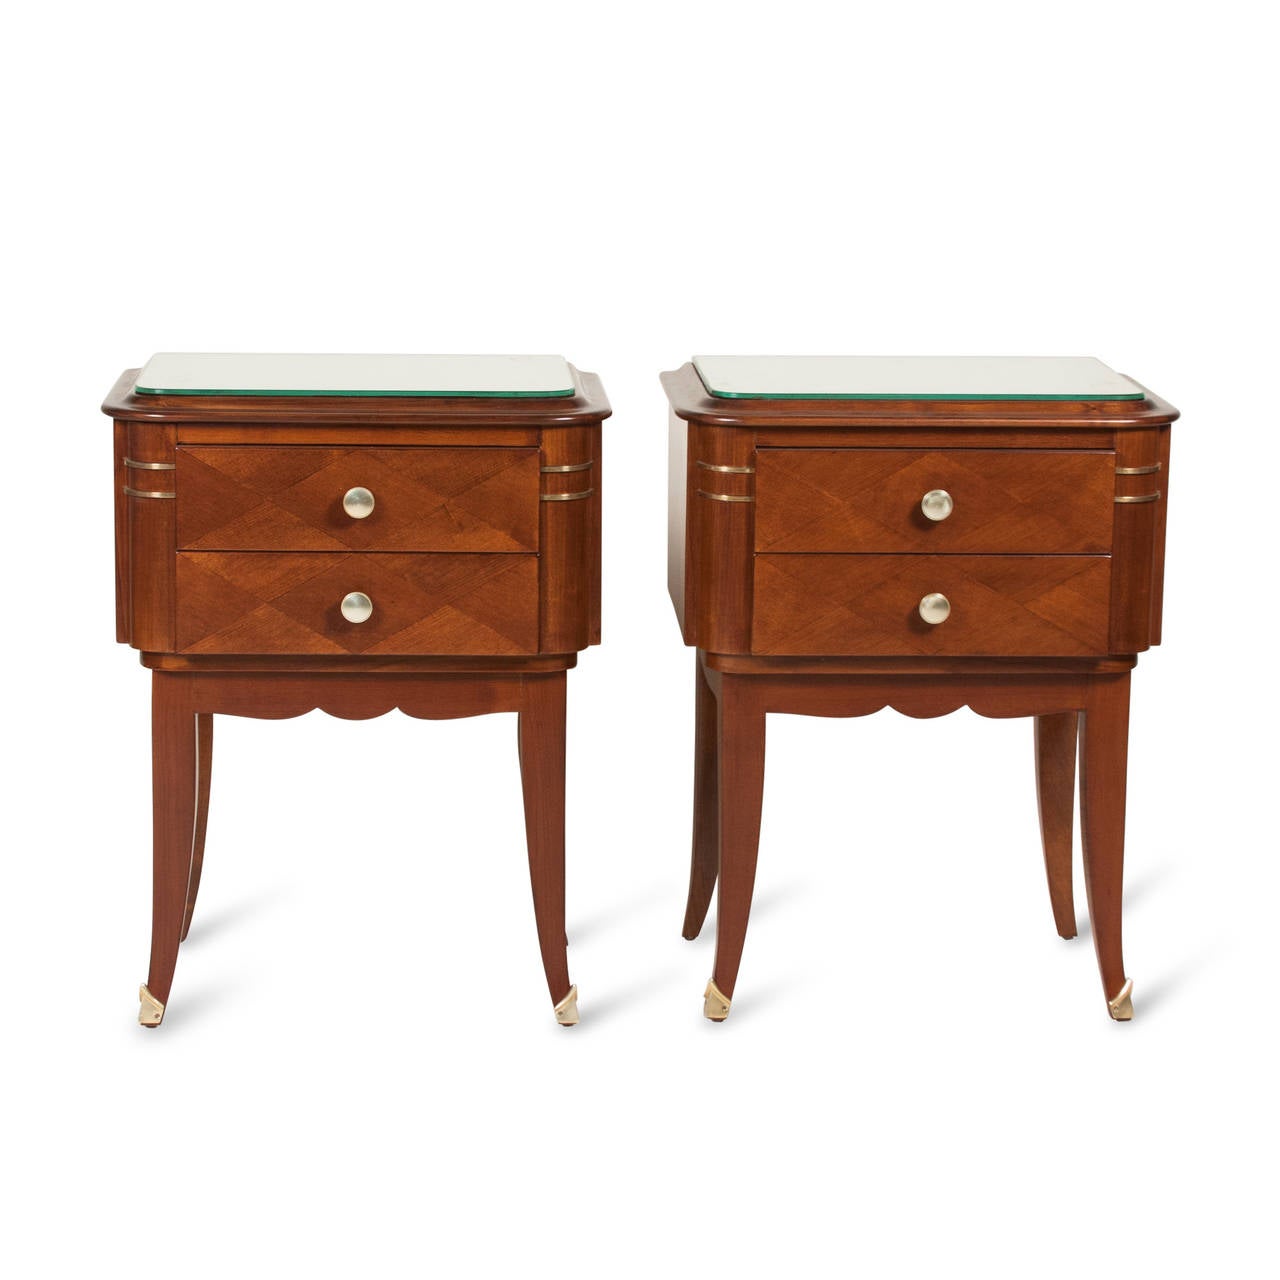 Pair of darkened sycamore two drawer end tables, with diamand marquet faces, brass pulls, the case mounted on arced legs with bronze sabots, shaped antiqued mirrored glass tops, French late 1940s. Height 24 1/2 in, width 20 in, depth 13 in. (Item